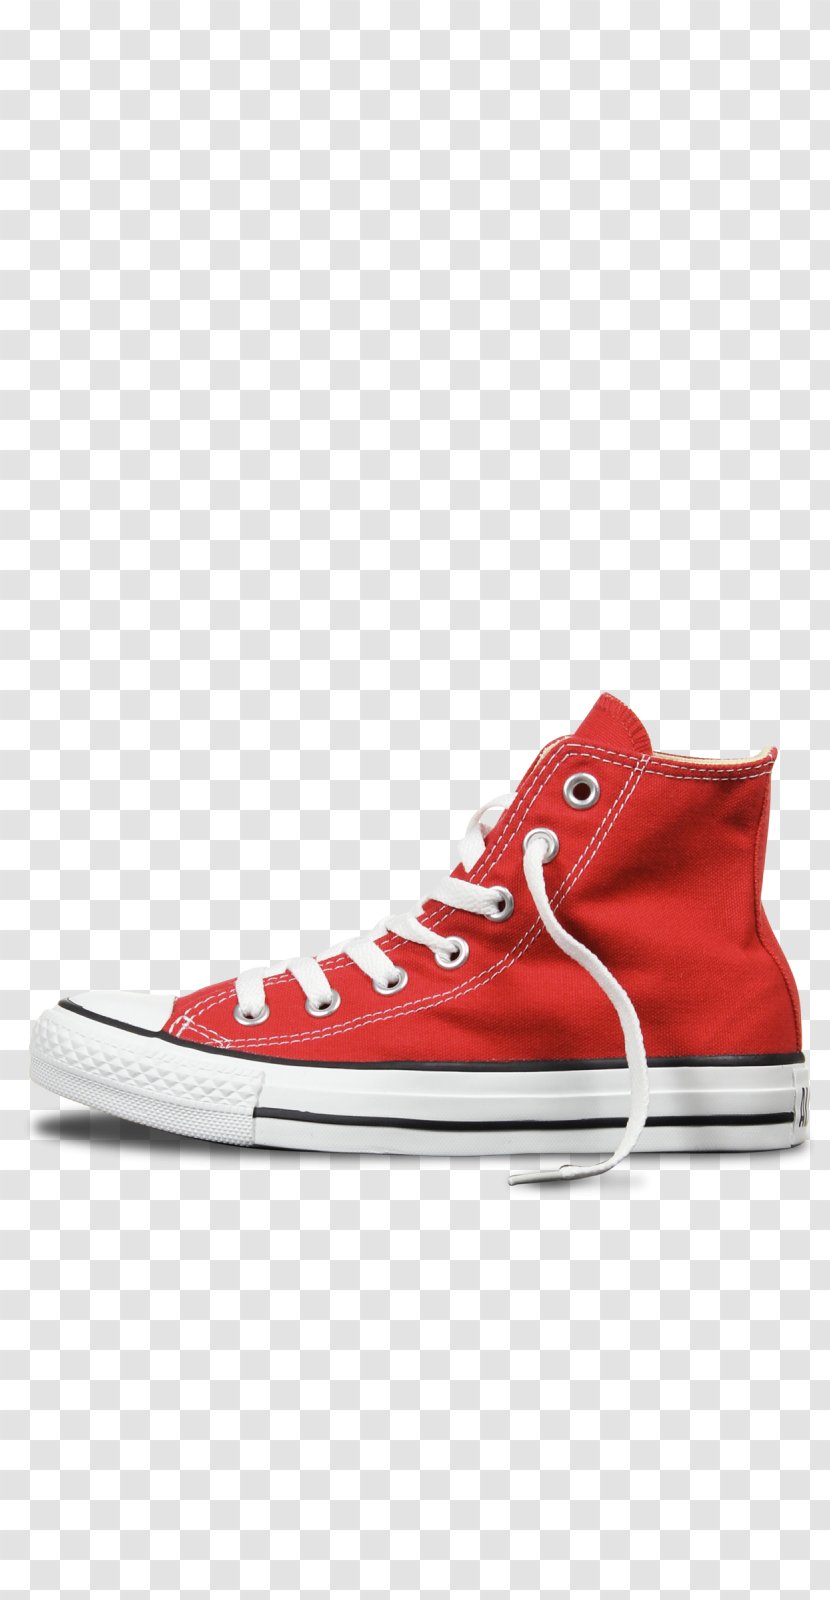 Chuck Taylor All-Stars Converse Sneakers High-top Shoe - Cross Training - High Heels Transparent PNG